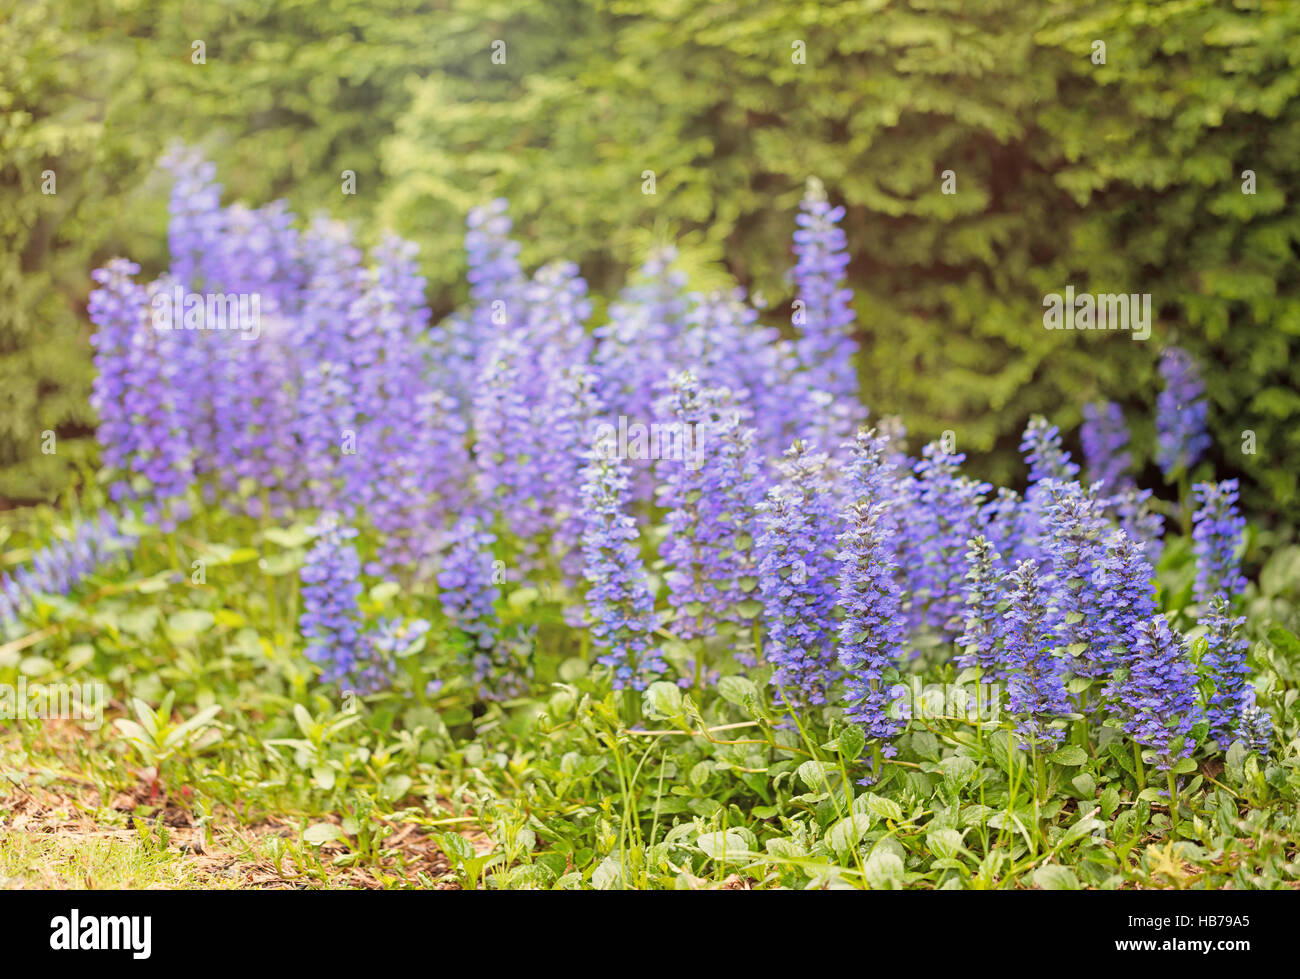 Bed of wild blue flowers in bright light Stock Photo